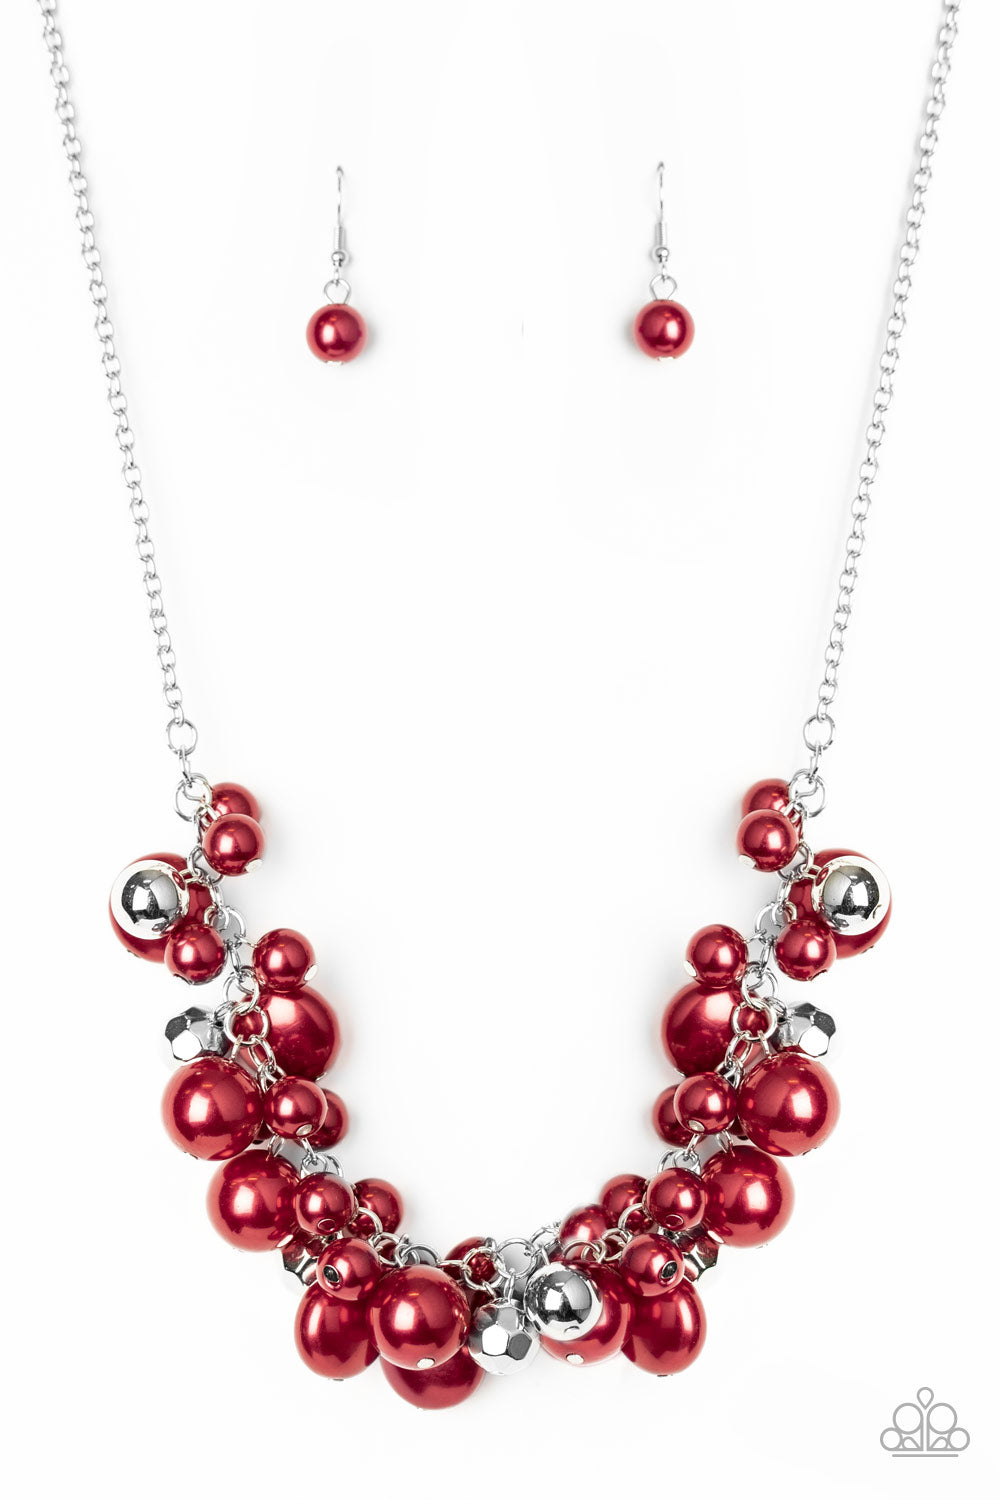 five-dollar-jewelry-battle-of-the-bombshells-red-paparazzi-accessories